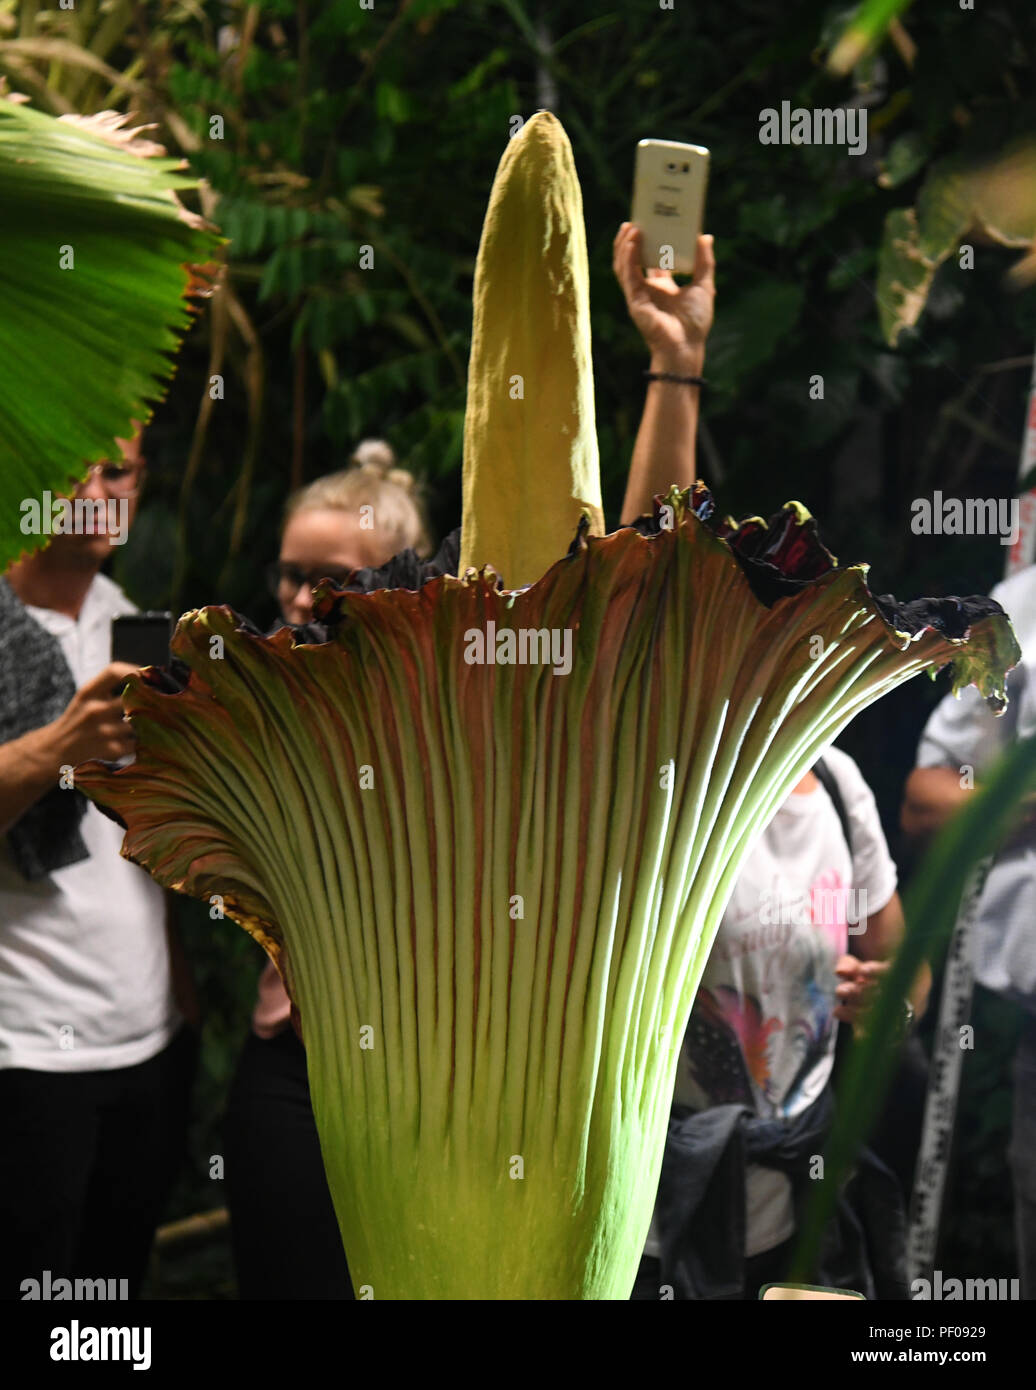 Dortmund, Germany. 17th Aug, 2018. Visitors photograph the titanium root (Amorphophallus titanum) in the Botanical Garden. This exotic plant blooms for only three days, during which it emits a distinctive smell. Credit: Ina Fassbender/dpa/Alamy Live News Stock Photo